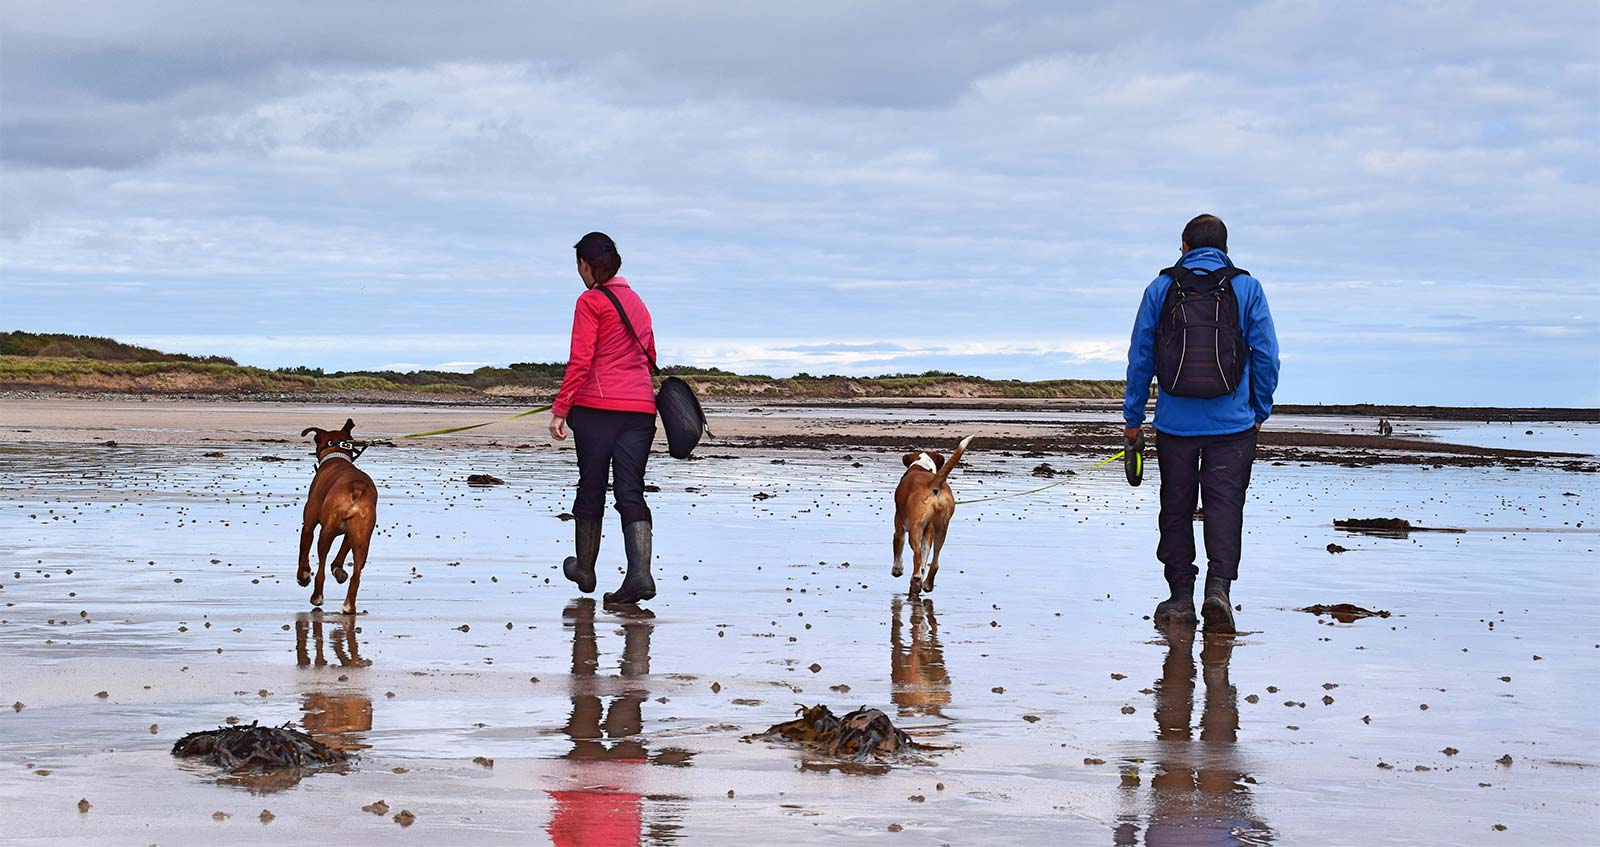 Couple of campers with two dogs at low tide in Oléron